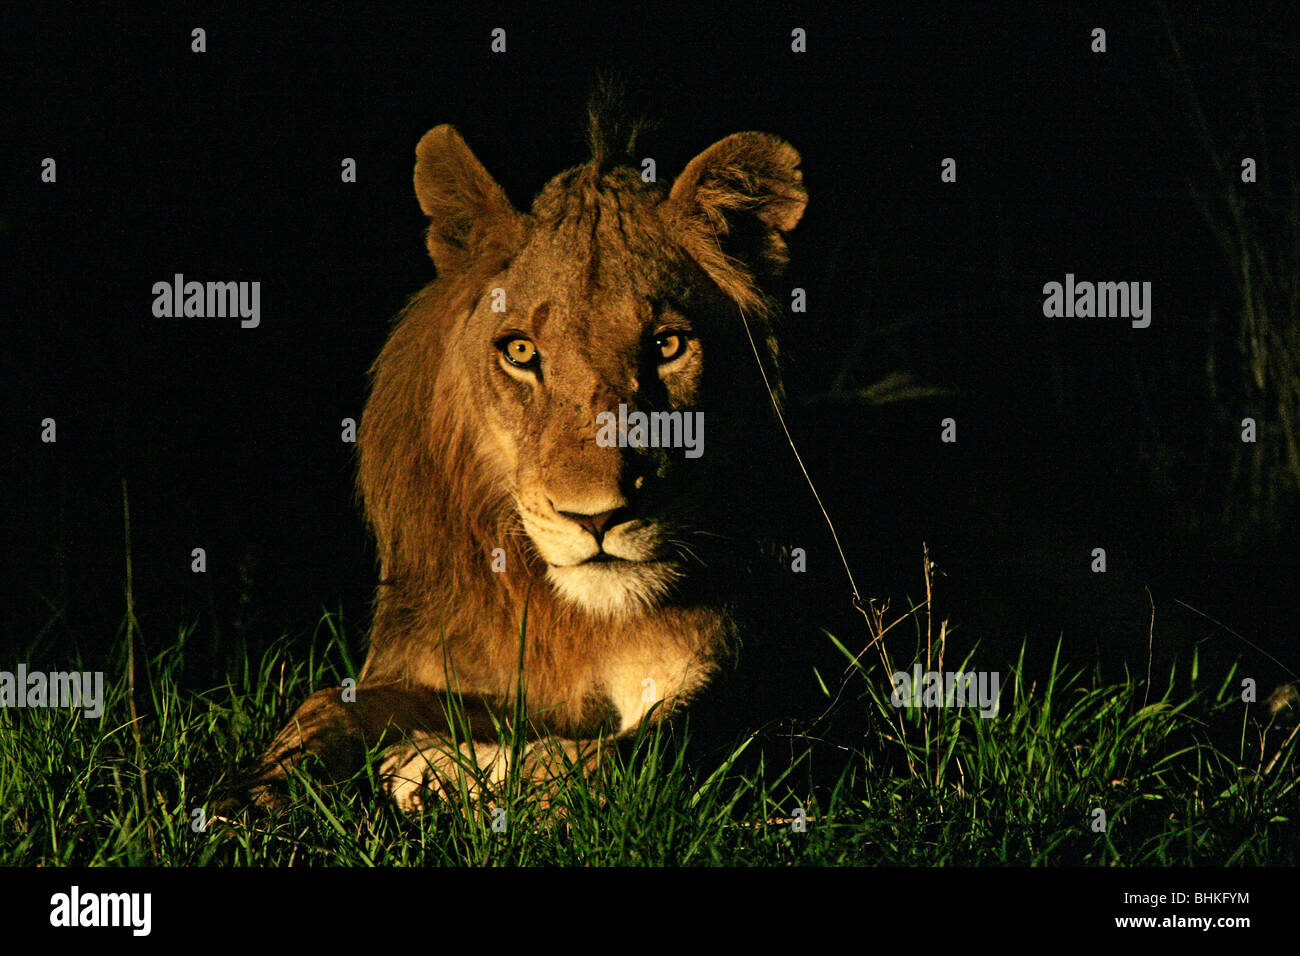 Wild lion in the South African bush or Bushveld at night. Stock Photo